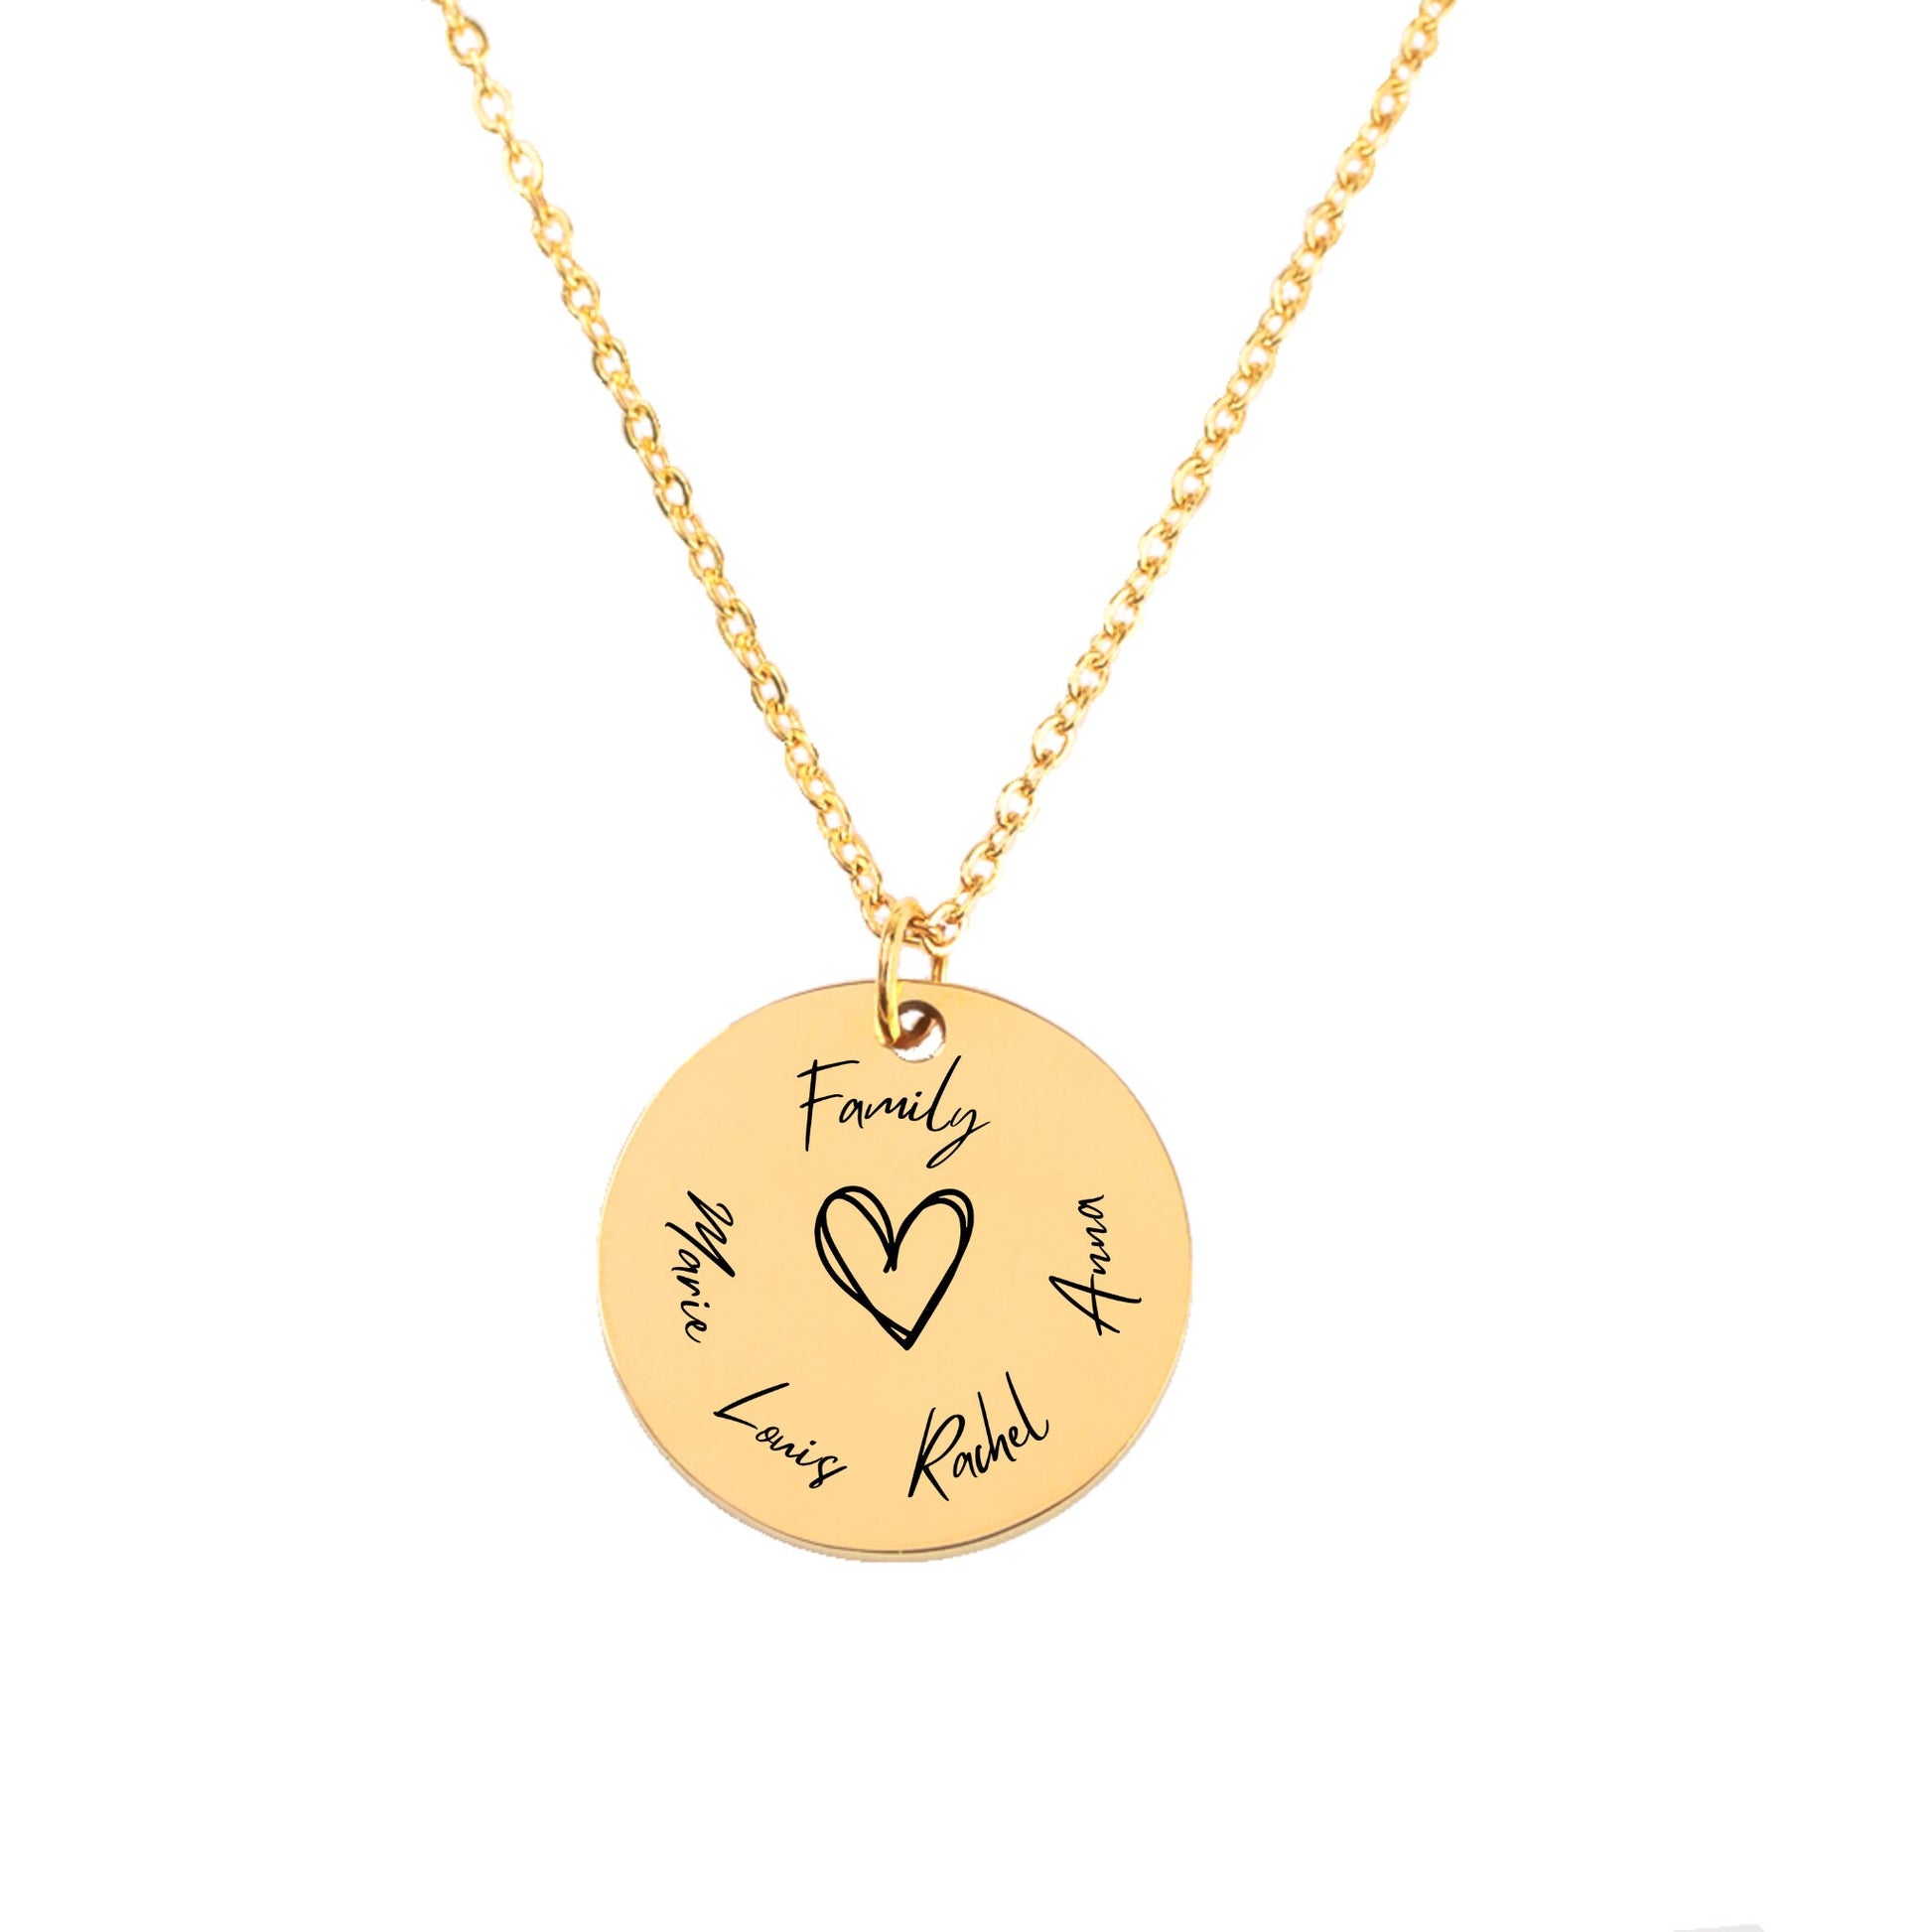 Your Family Name Necklace - Personalizable Jewelry